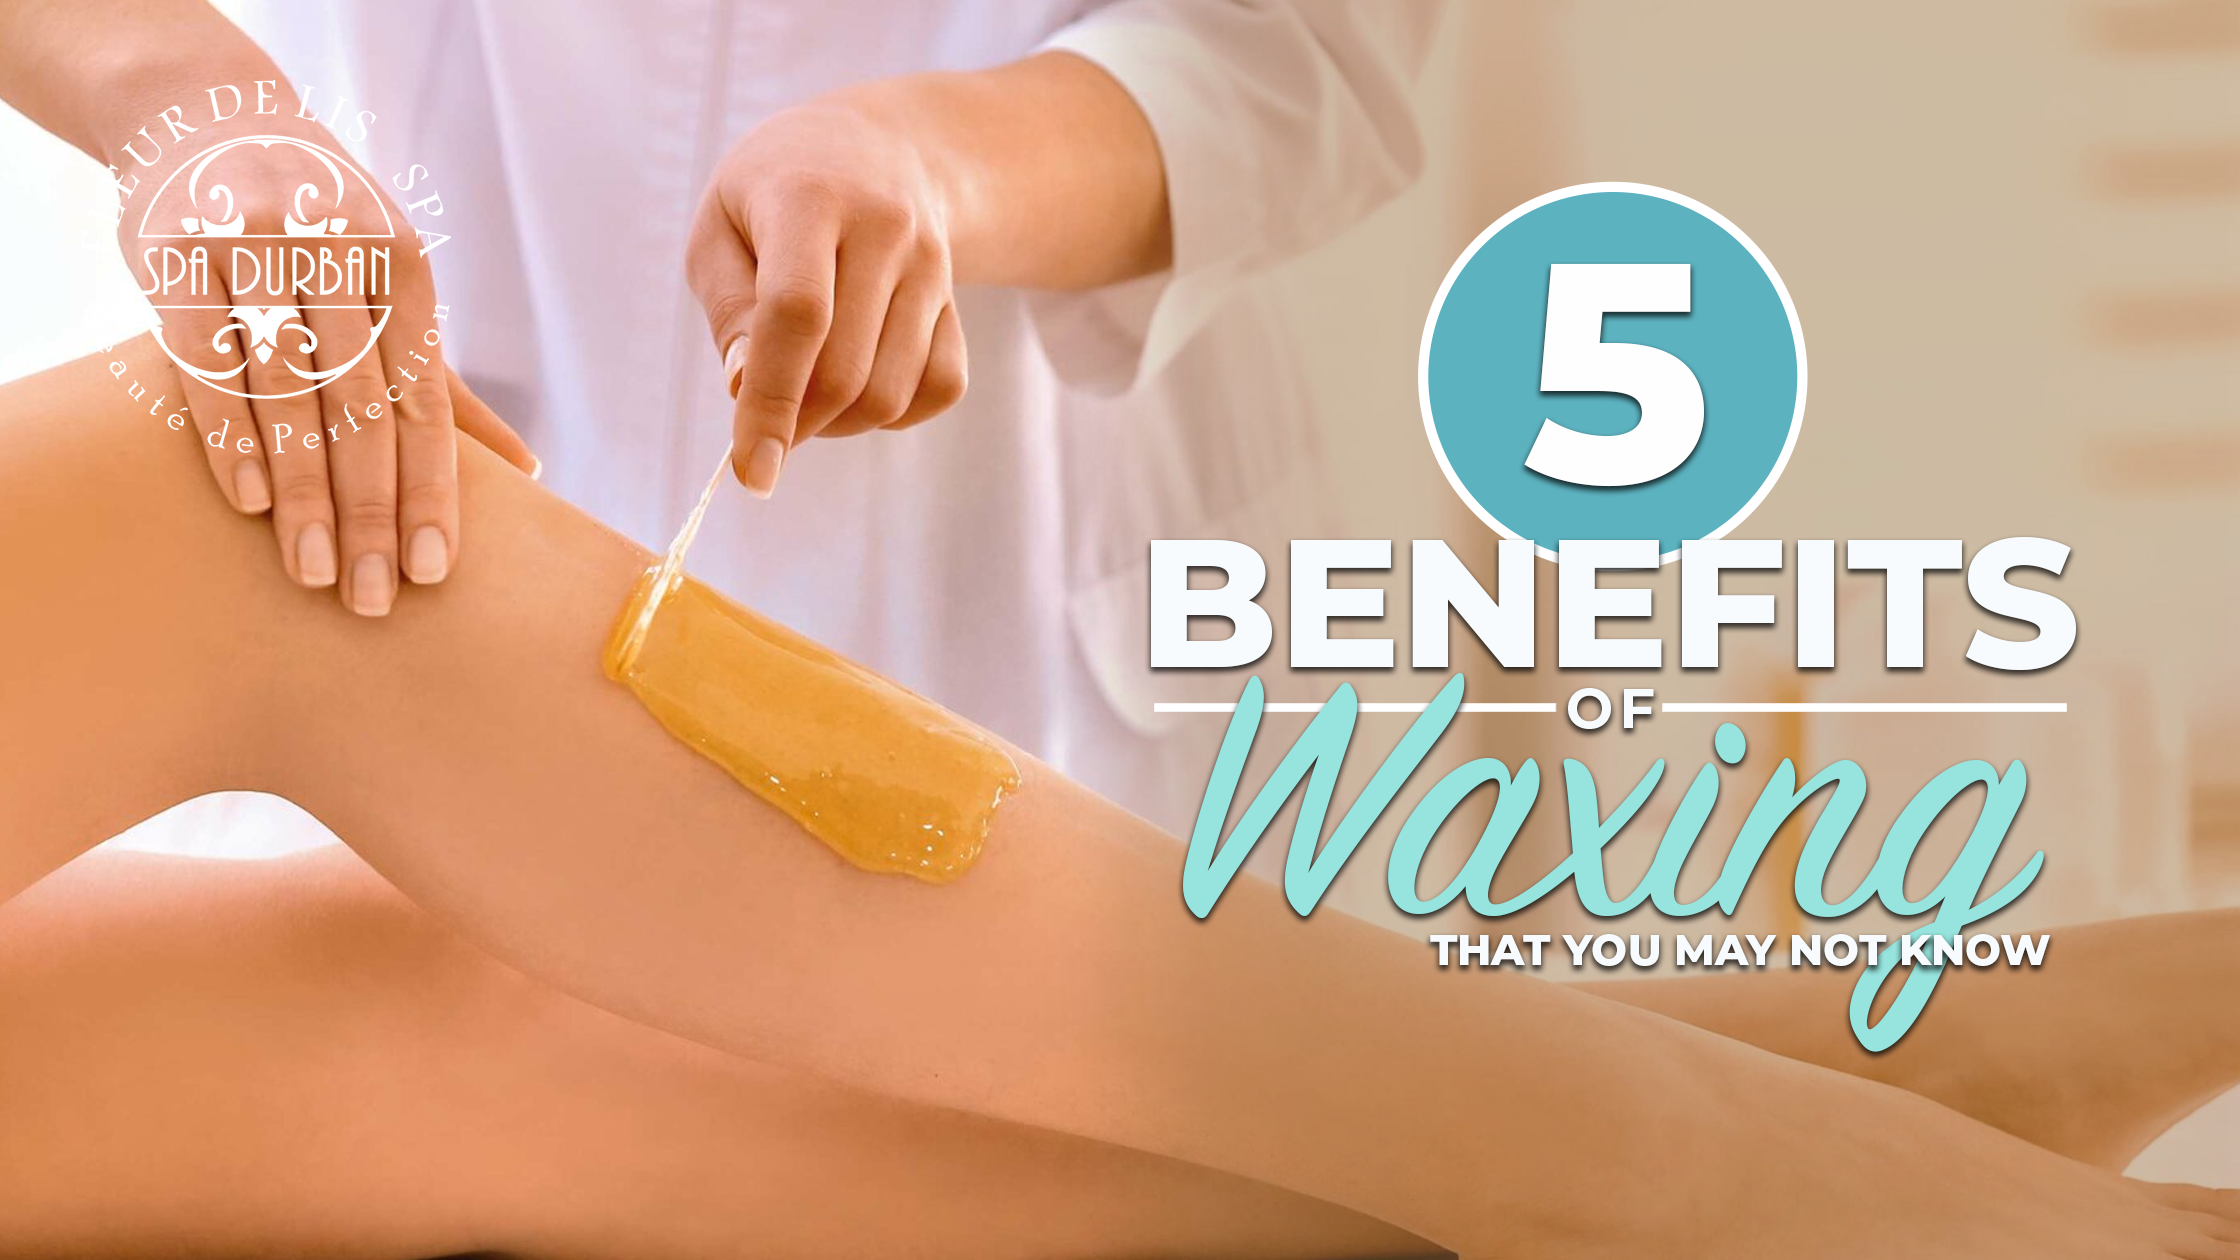 5 Benefits of Waxing That You May Not Know